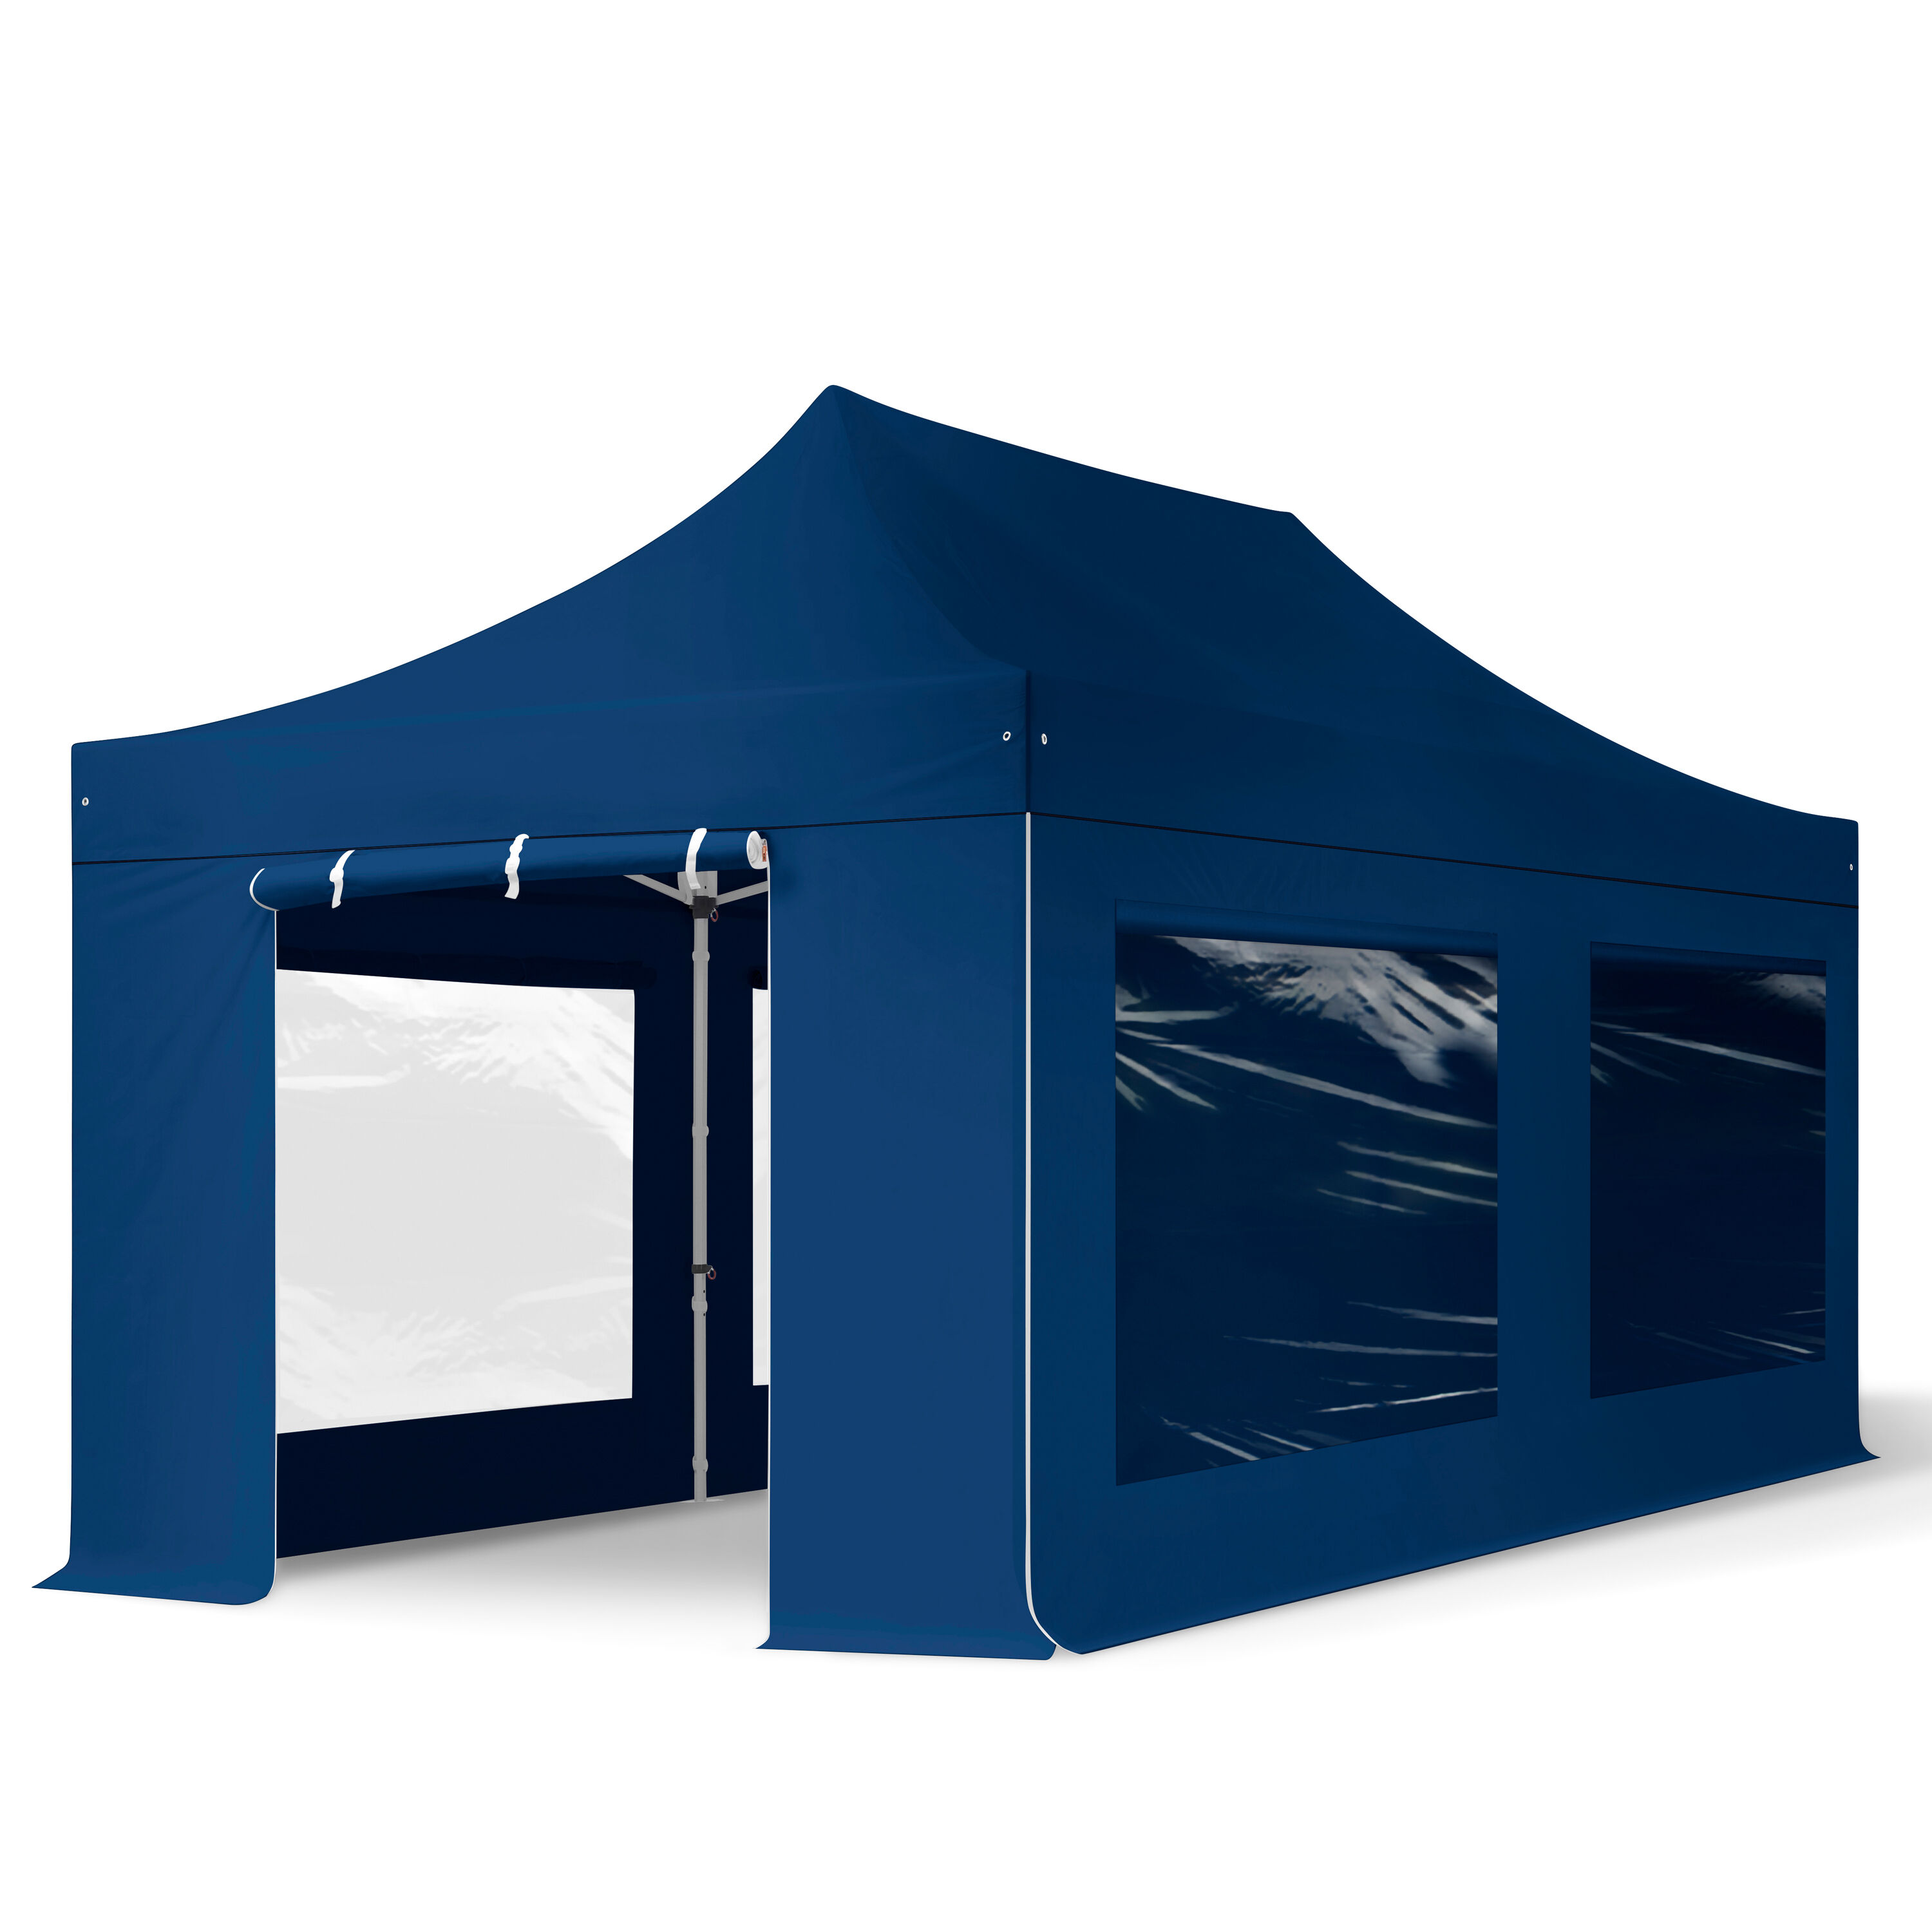 TOOLPORT Easy up Partytent 3x6m Hoogwaardig polyester 400 g/m² blauw waterdicht Easy Up Tent, Pop Up Partytent, Harmonicatent, Vouwtent